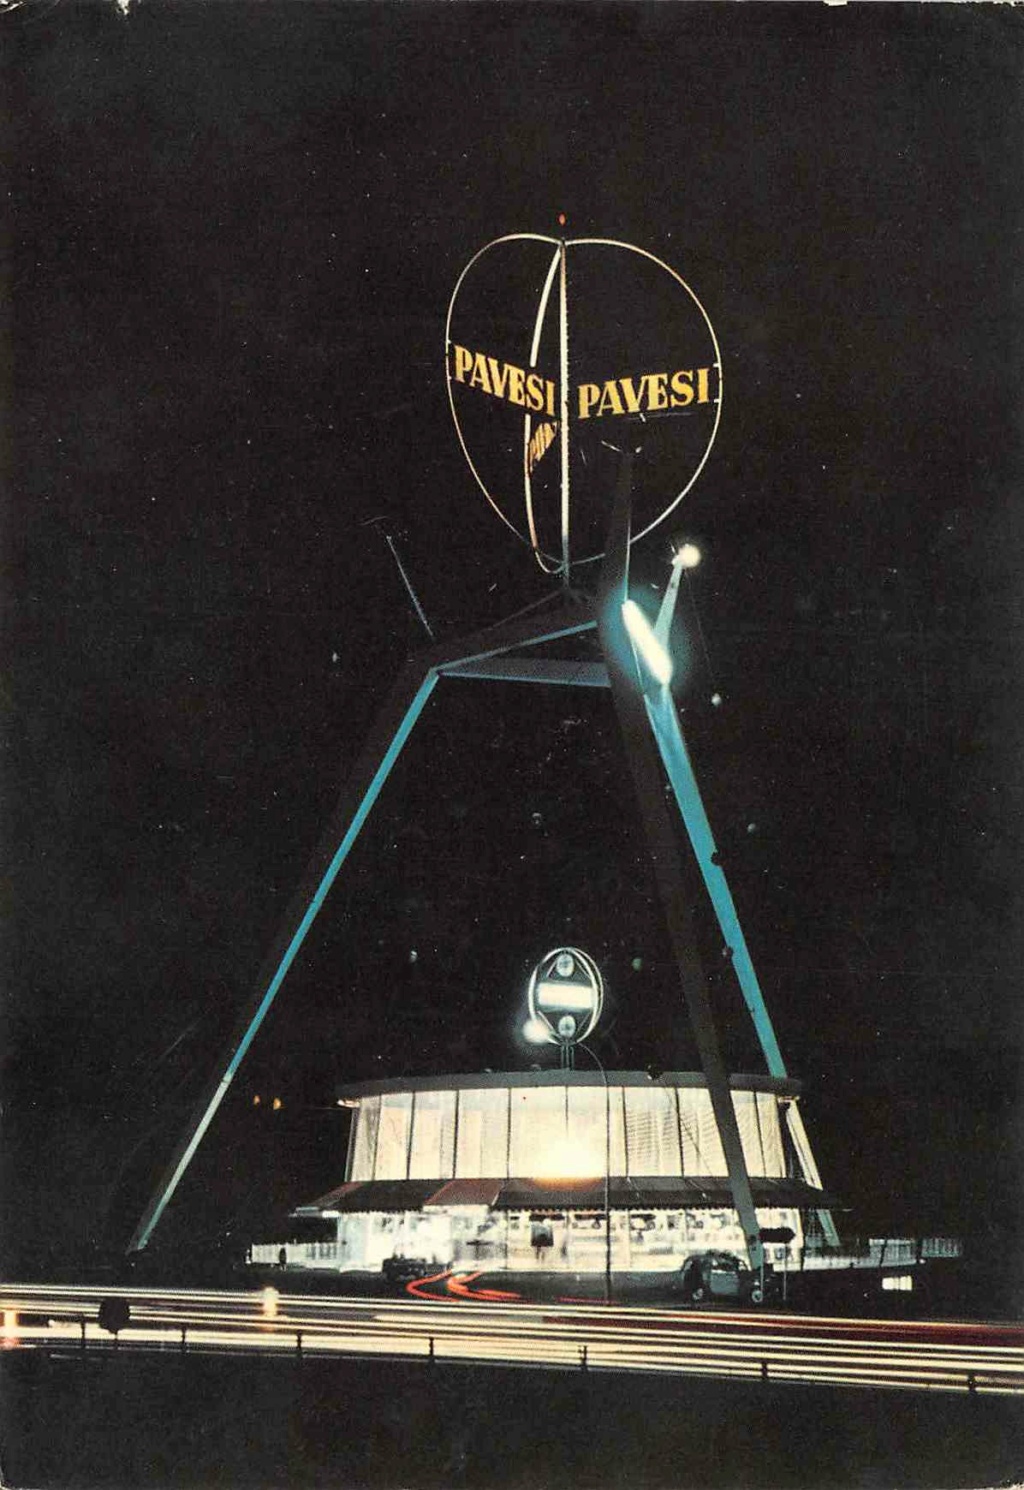 Pavesi Restaurante- Italy -Autogrill - Atomic and Mid century modern architecture 20200910